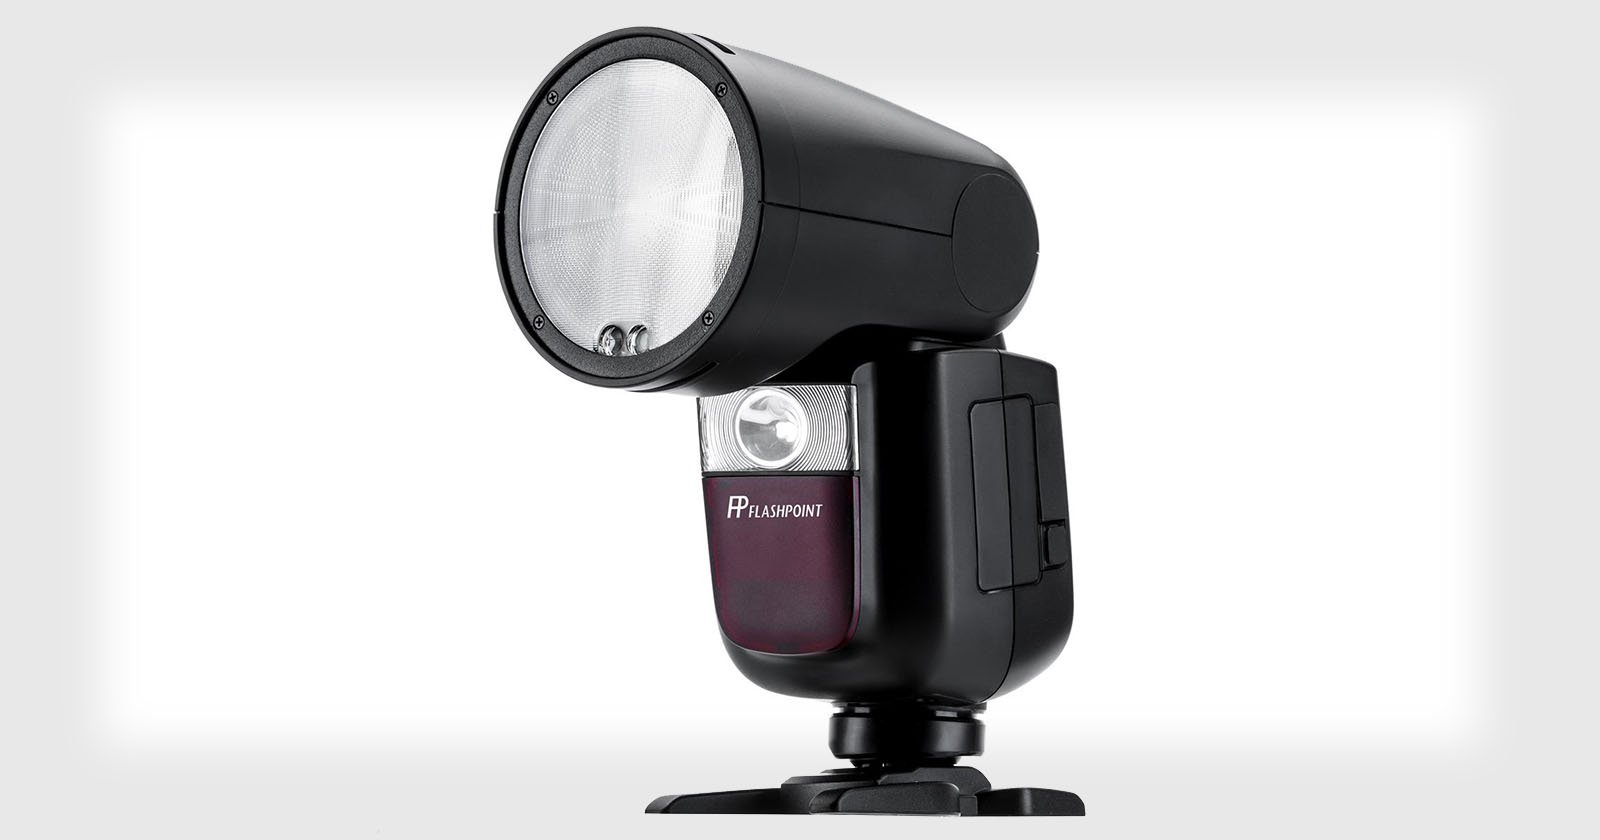 Watch out Profoto, the Godox V1 round head flash is just around the corner:  Digital Photography Review